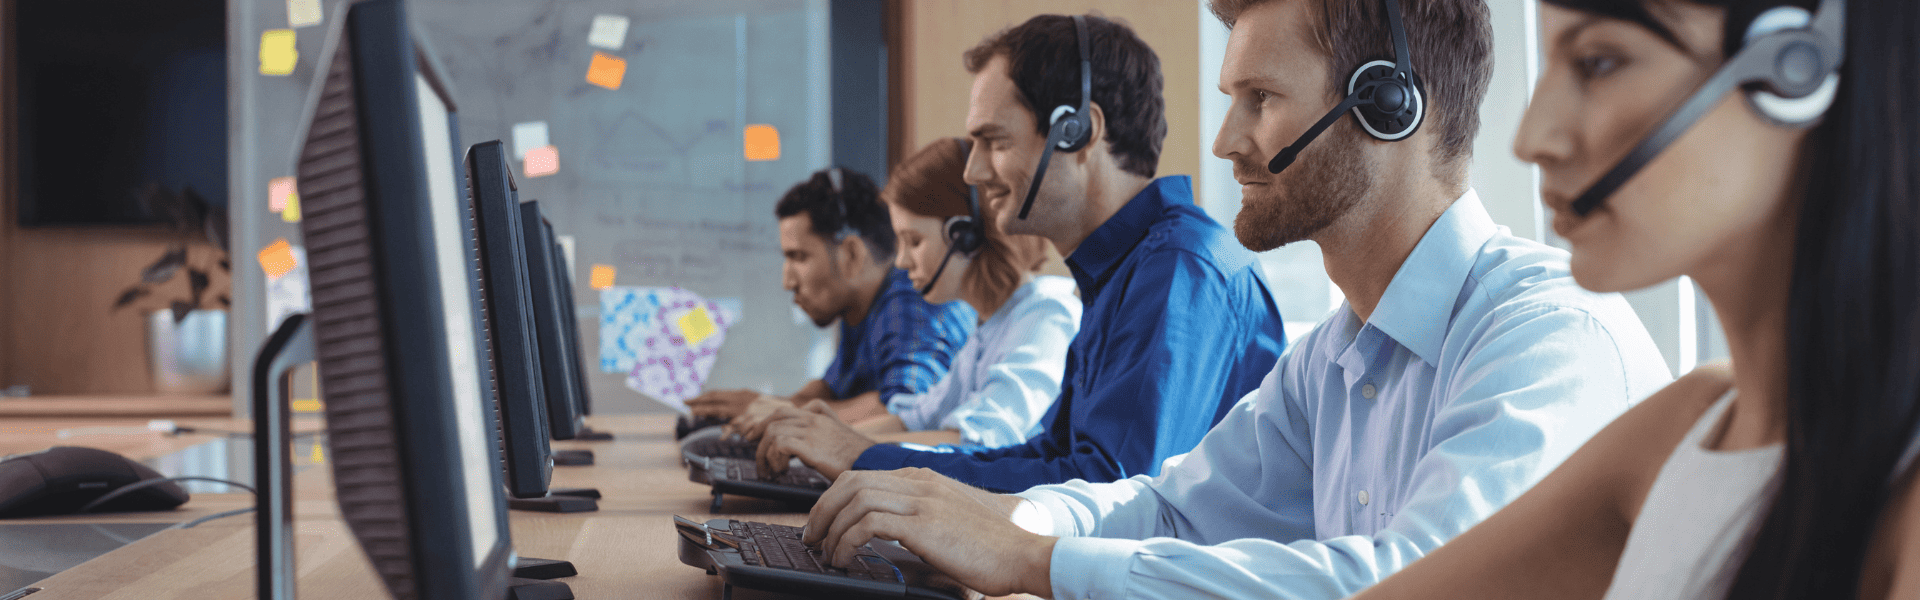 3 Reasons to Switch from On-Premises to a Cloud Contact Center